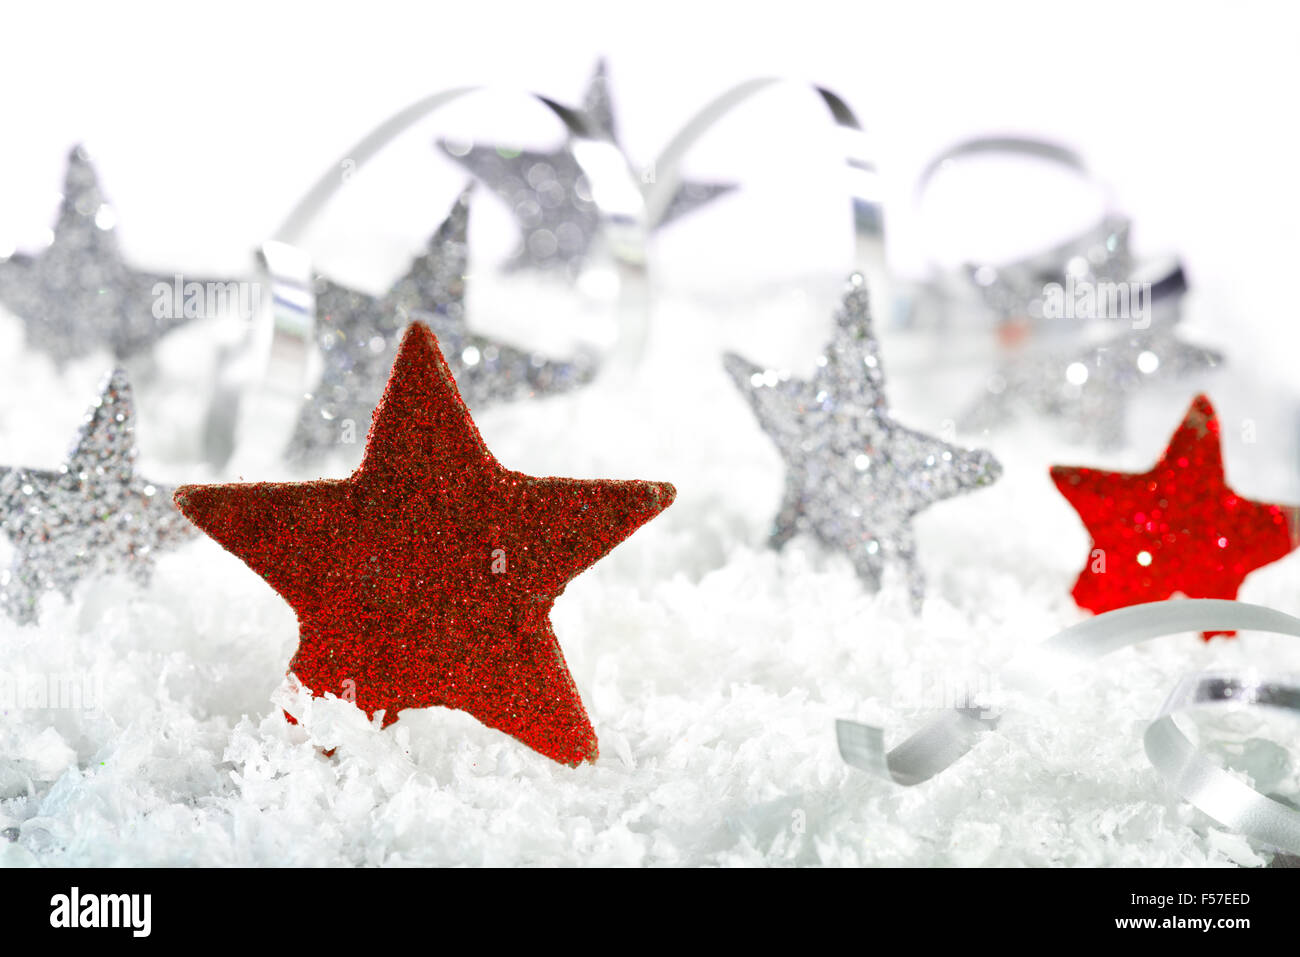 Red Christmas star with silver stars on the snow Stock Photo